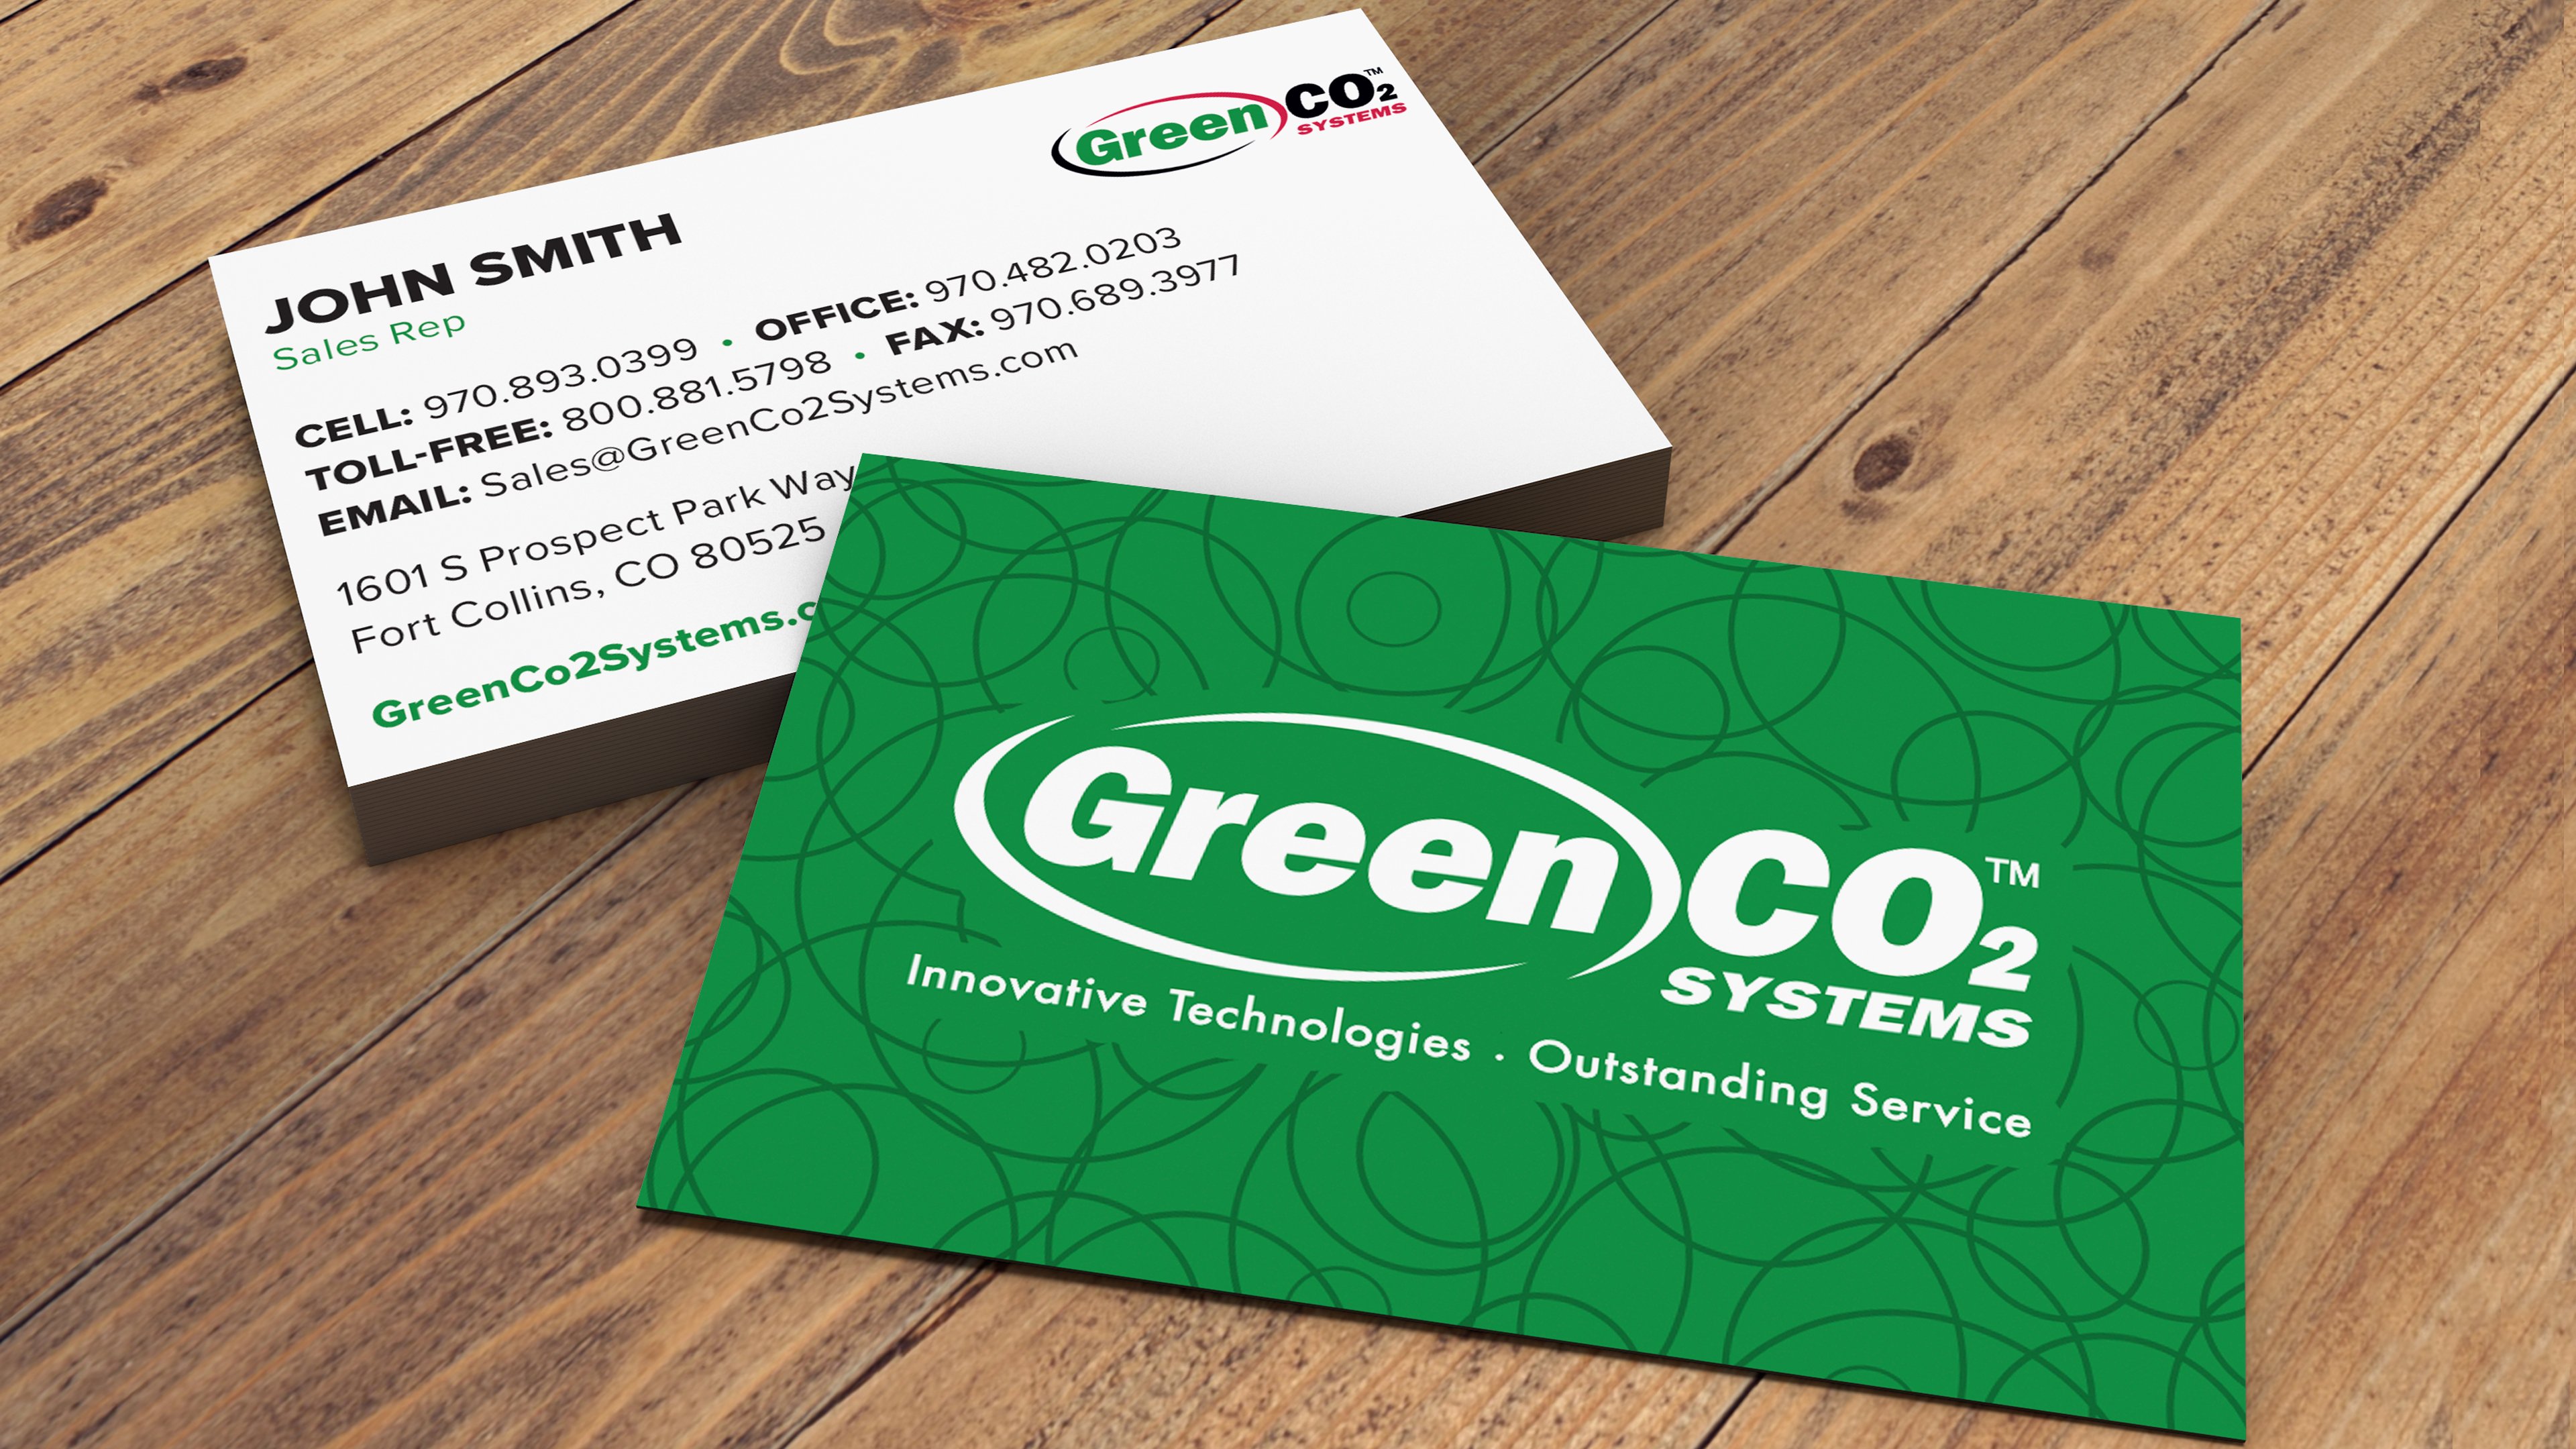 green co2 systems business card mockups.